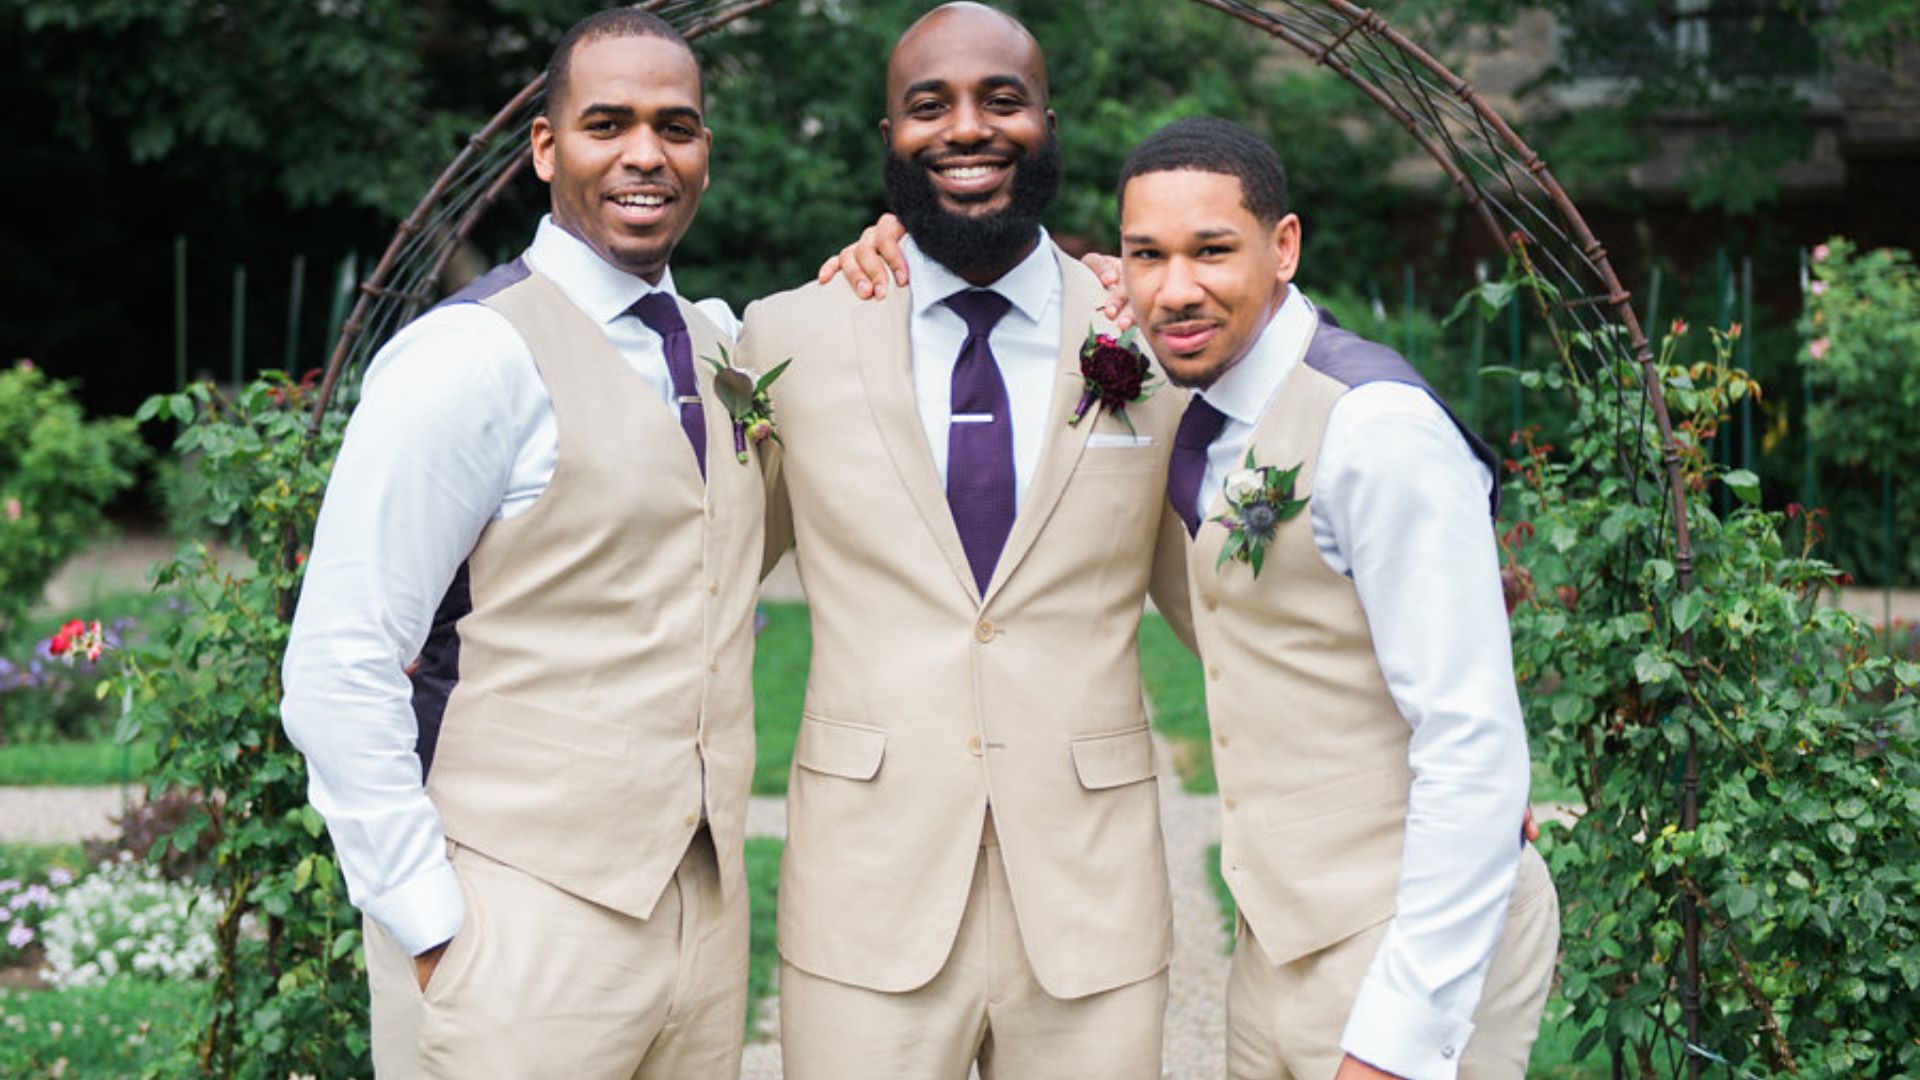 How to Choose the Right Wedding Suit for Your Big Day